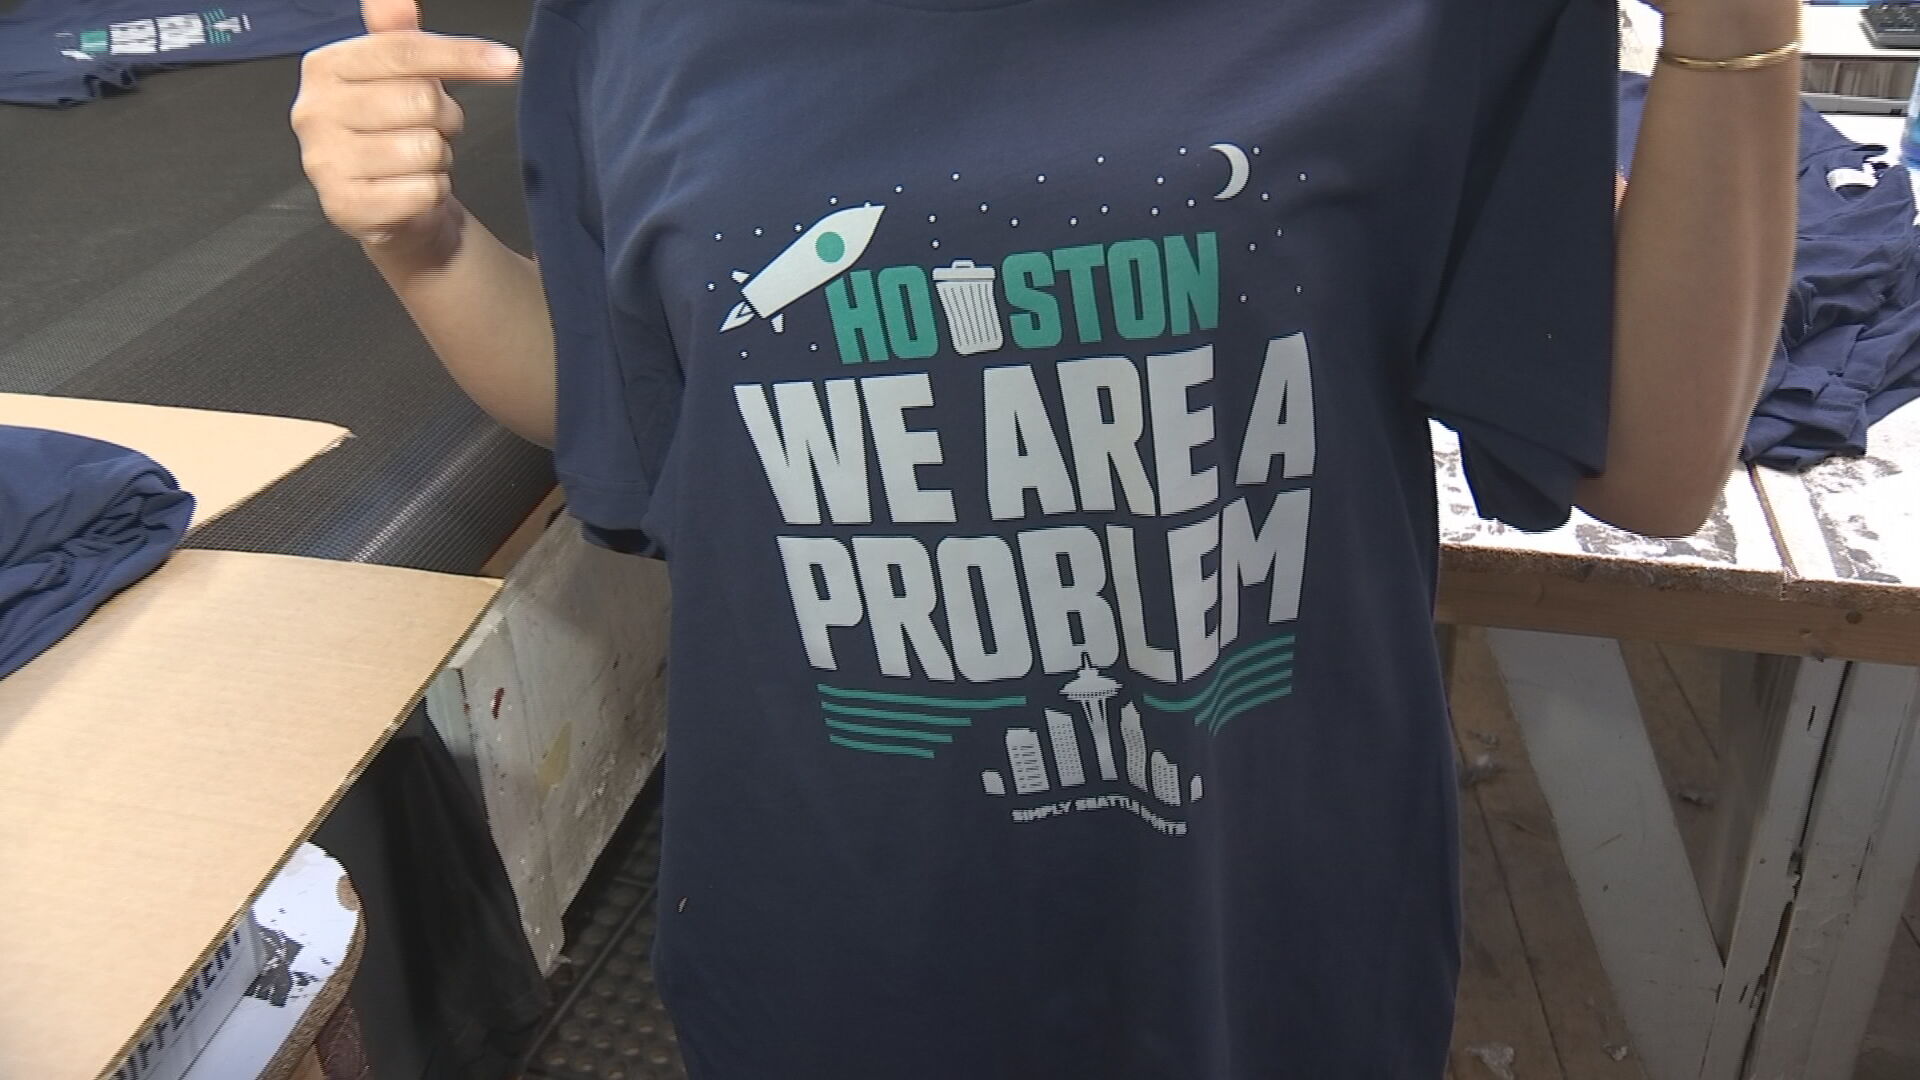 Mariners postseason merchandise nearly sold out two days after